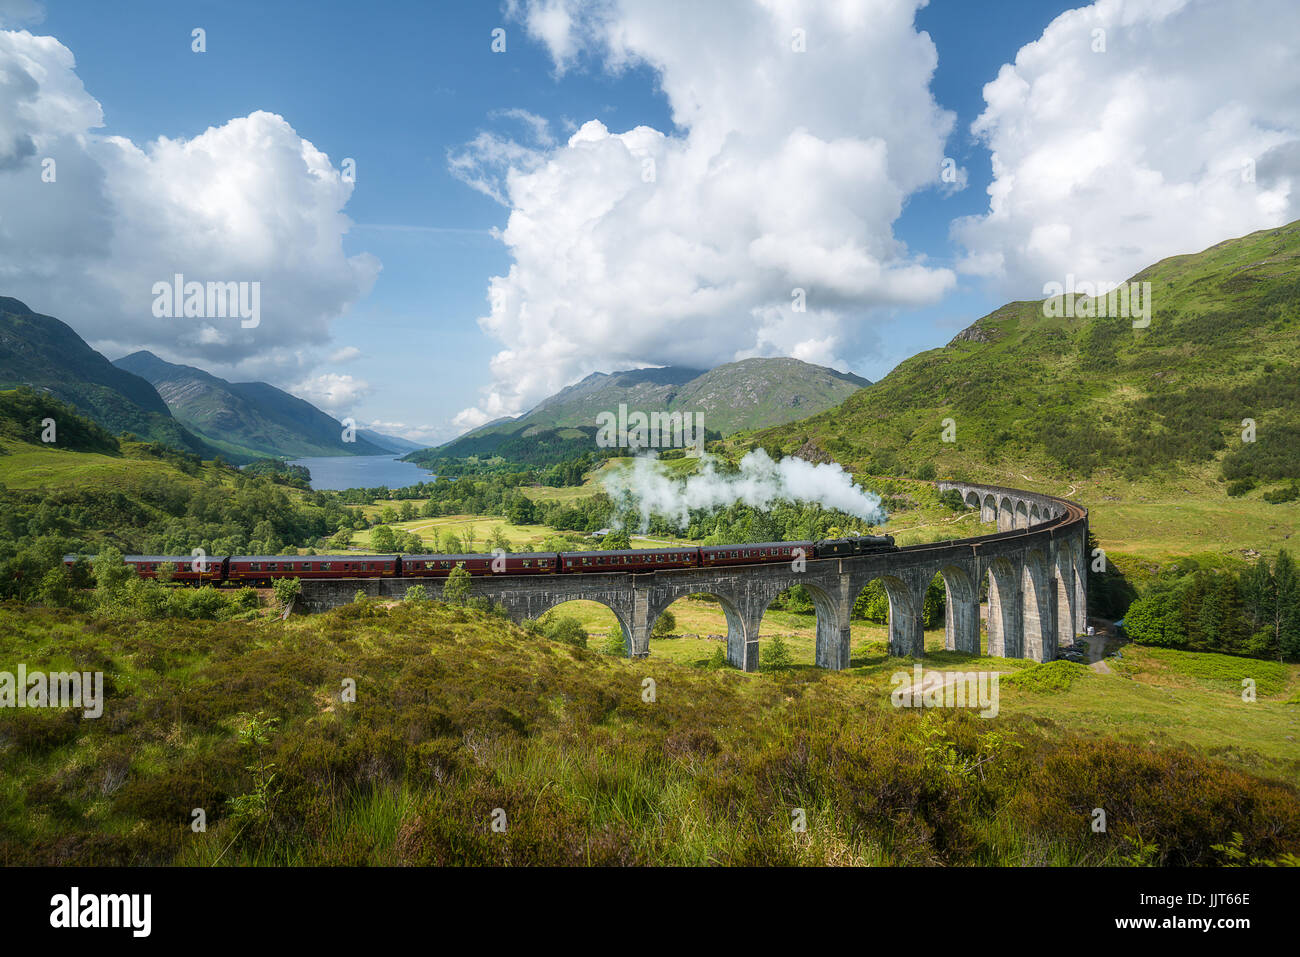 Vintage steam train passes the famous Glenfinnan viaduct with views over Loch Shiel Stock Photo